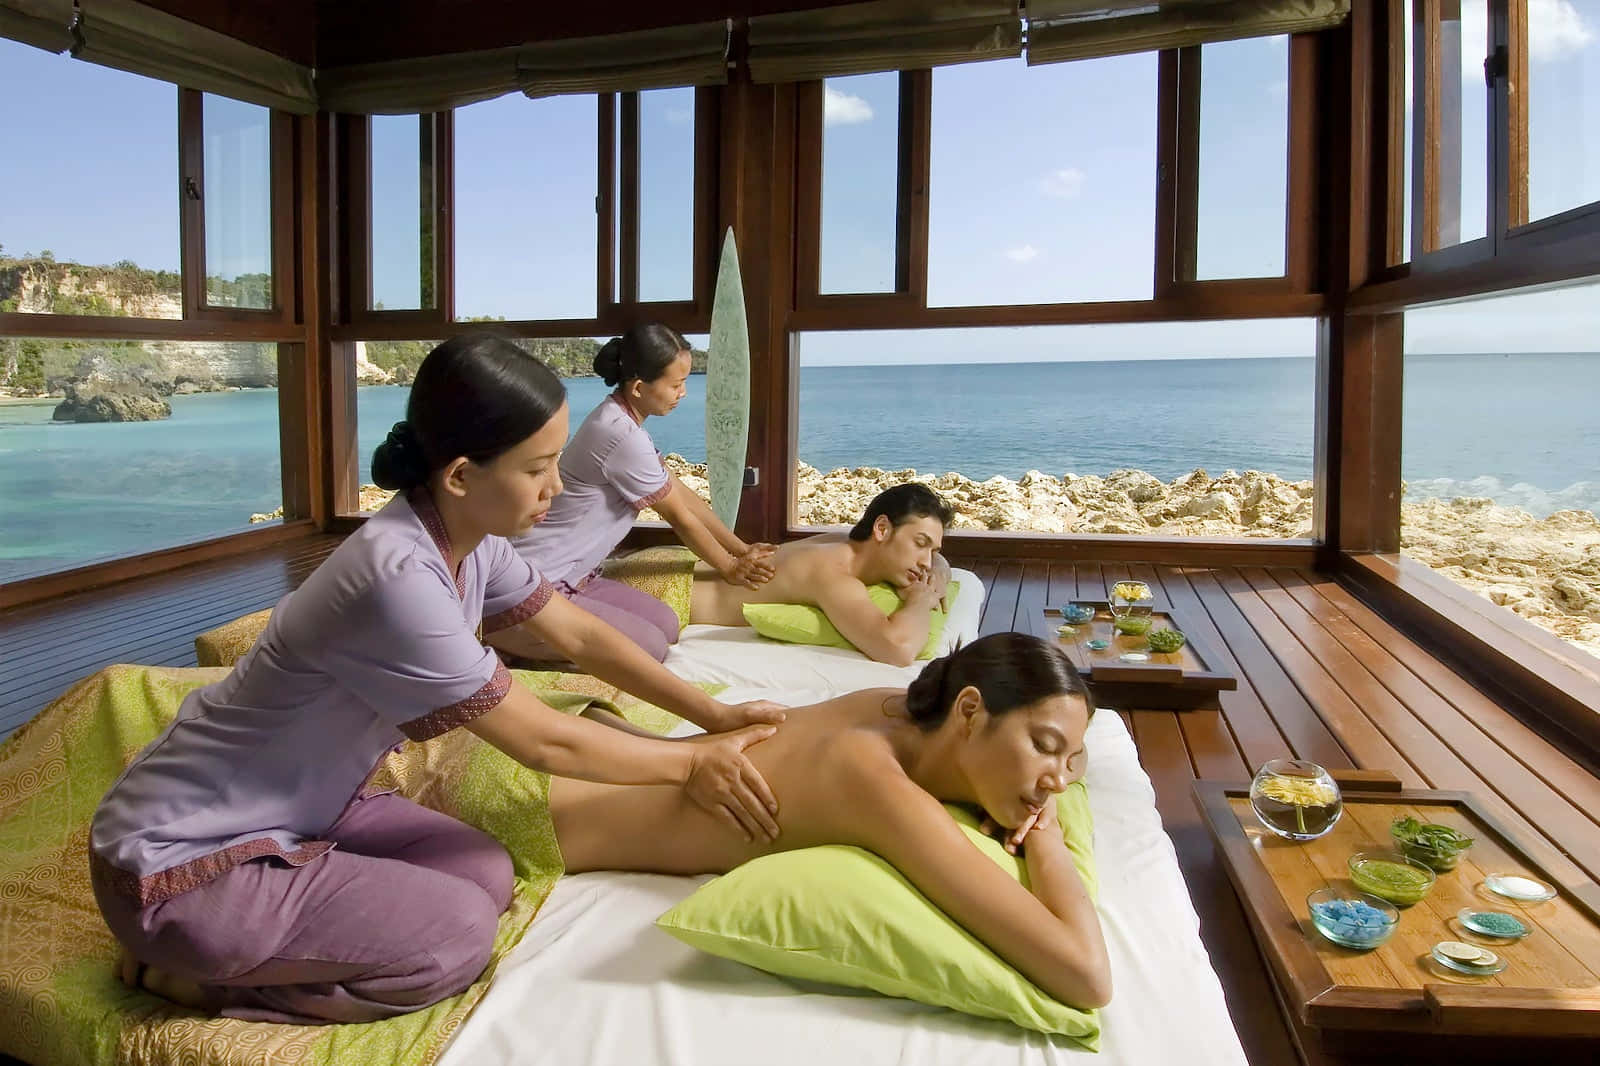 Massage In A Peaceful Spa Picture